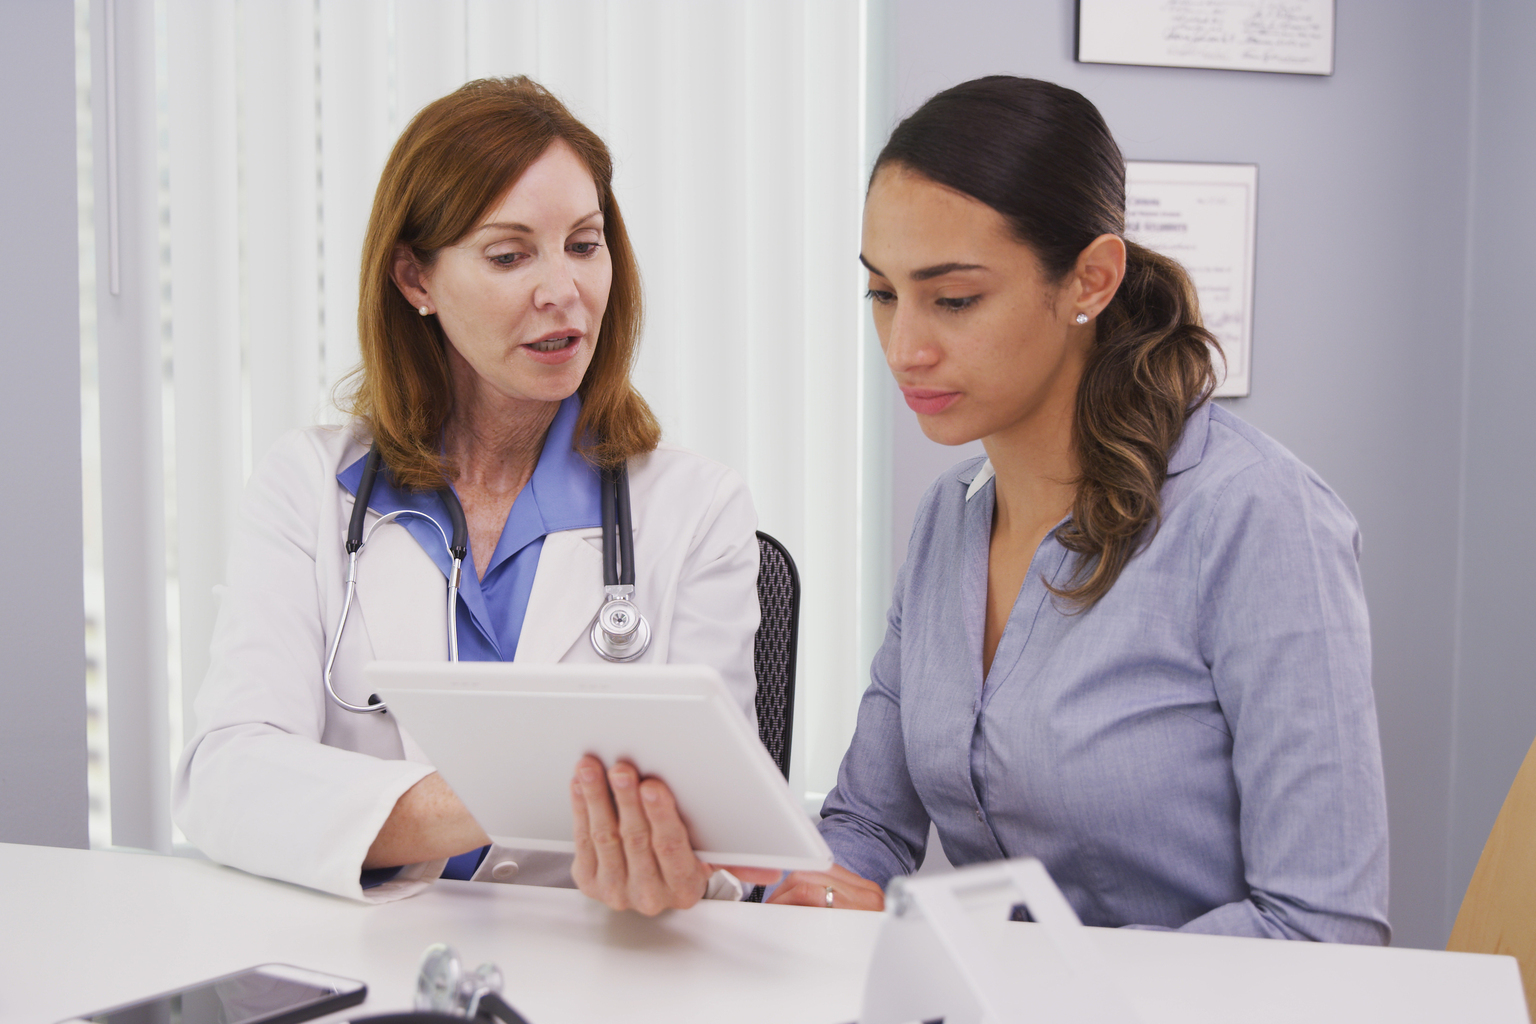 Latina patient consulting with doctor test results on portable tablet